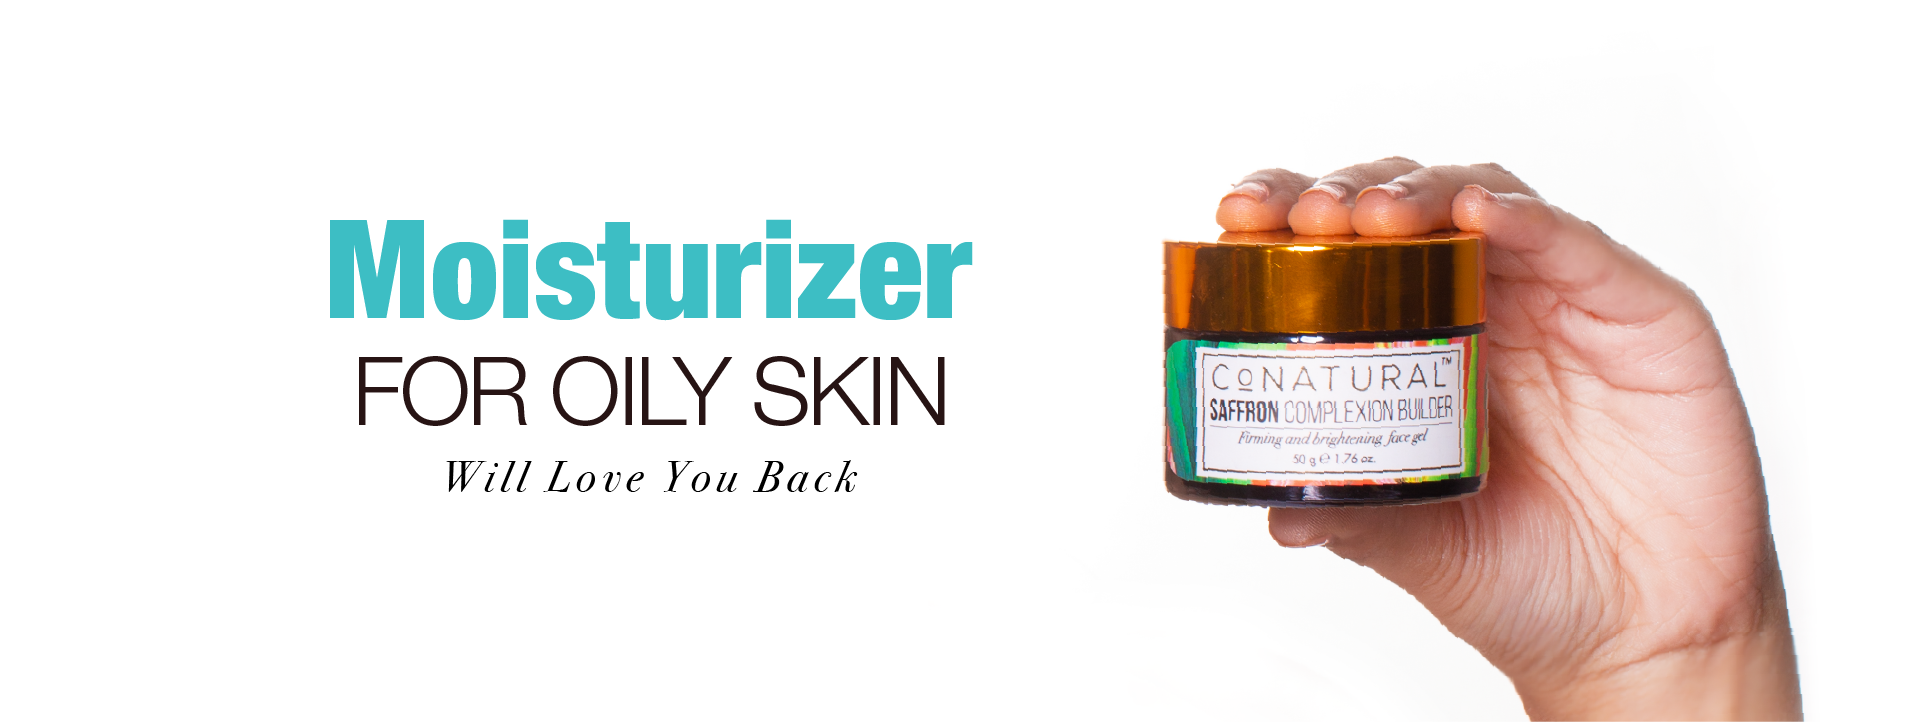 This Moisturizer for Oily Skin Will Love You Back – Conatural